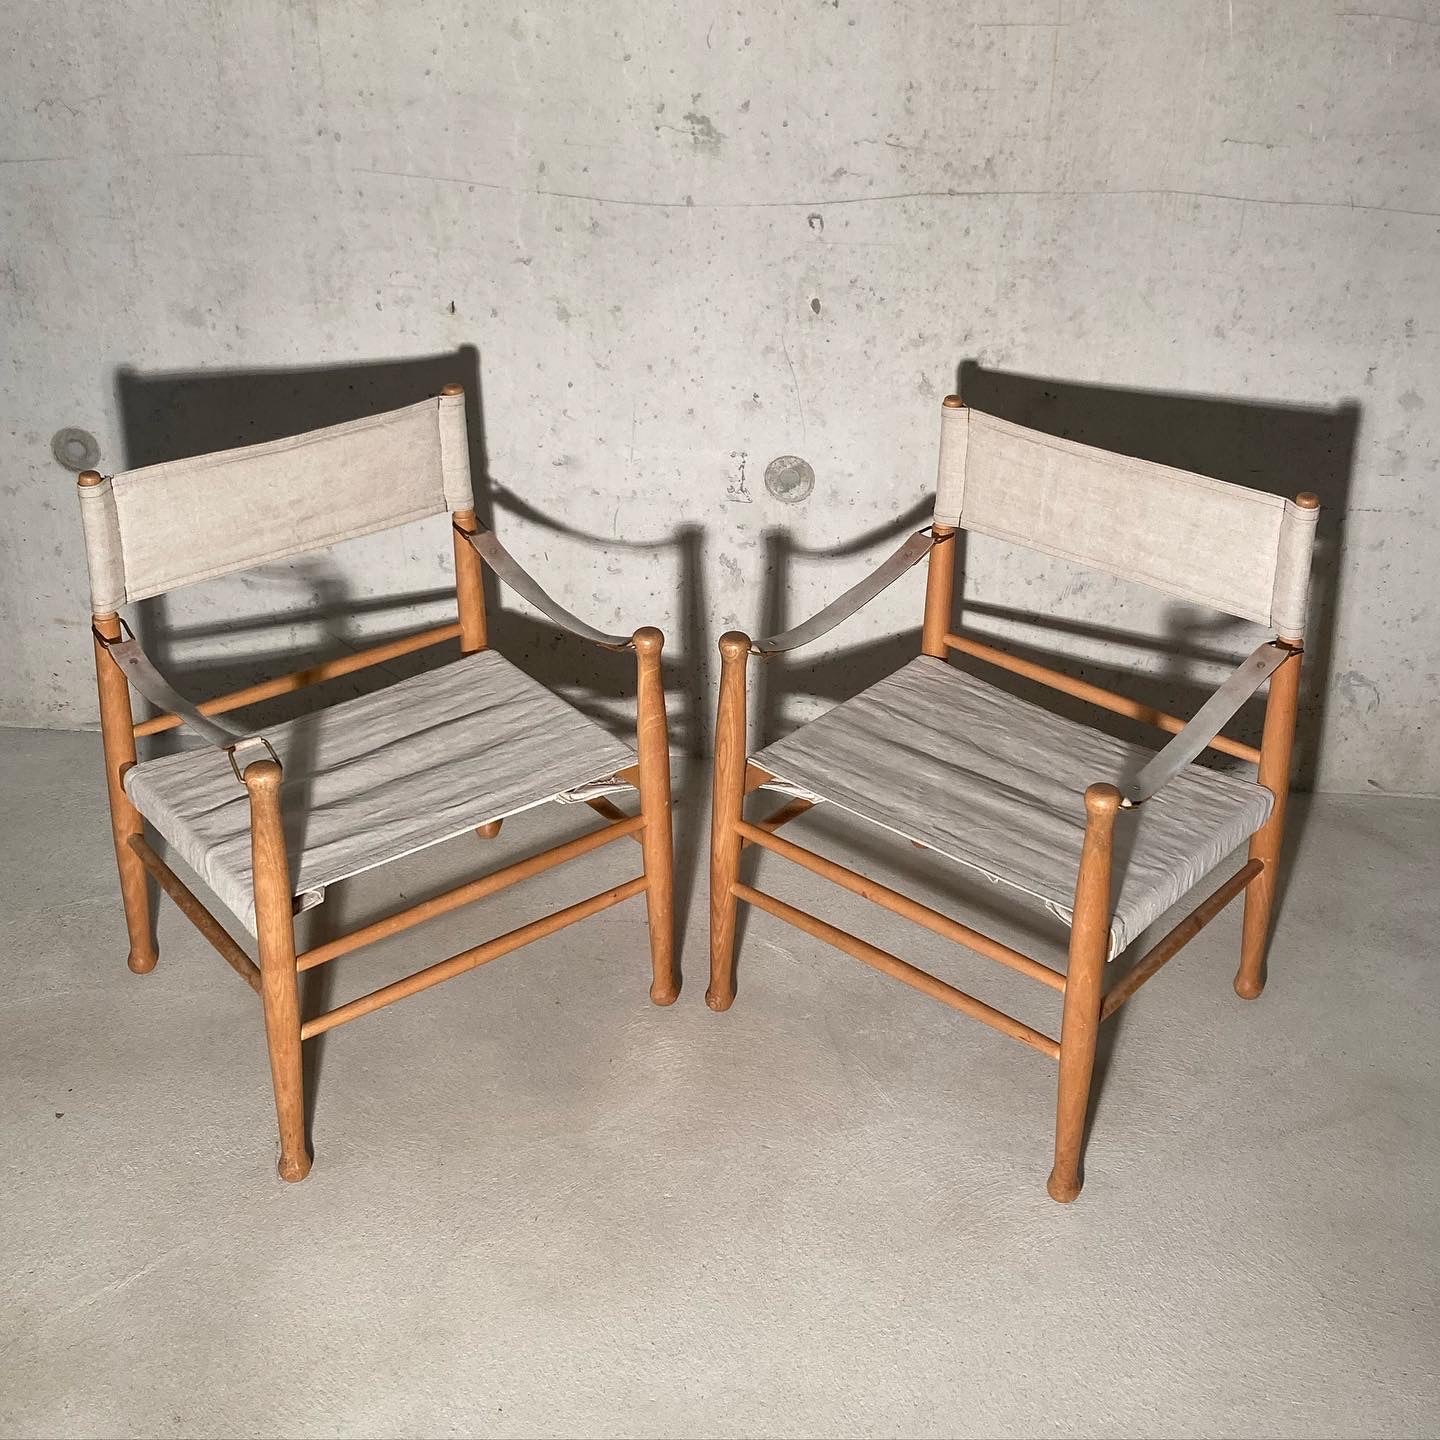 Beautiful pair of matching midcentury Safari Chairs by Farstrup of Denmark. Very stylish examples, linen fabric, leather armrests and birchwood frames that are easily dismantled for sending or storage (delivery costs are low thanks this ingenious